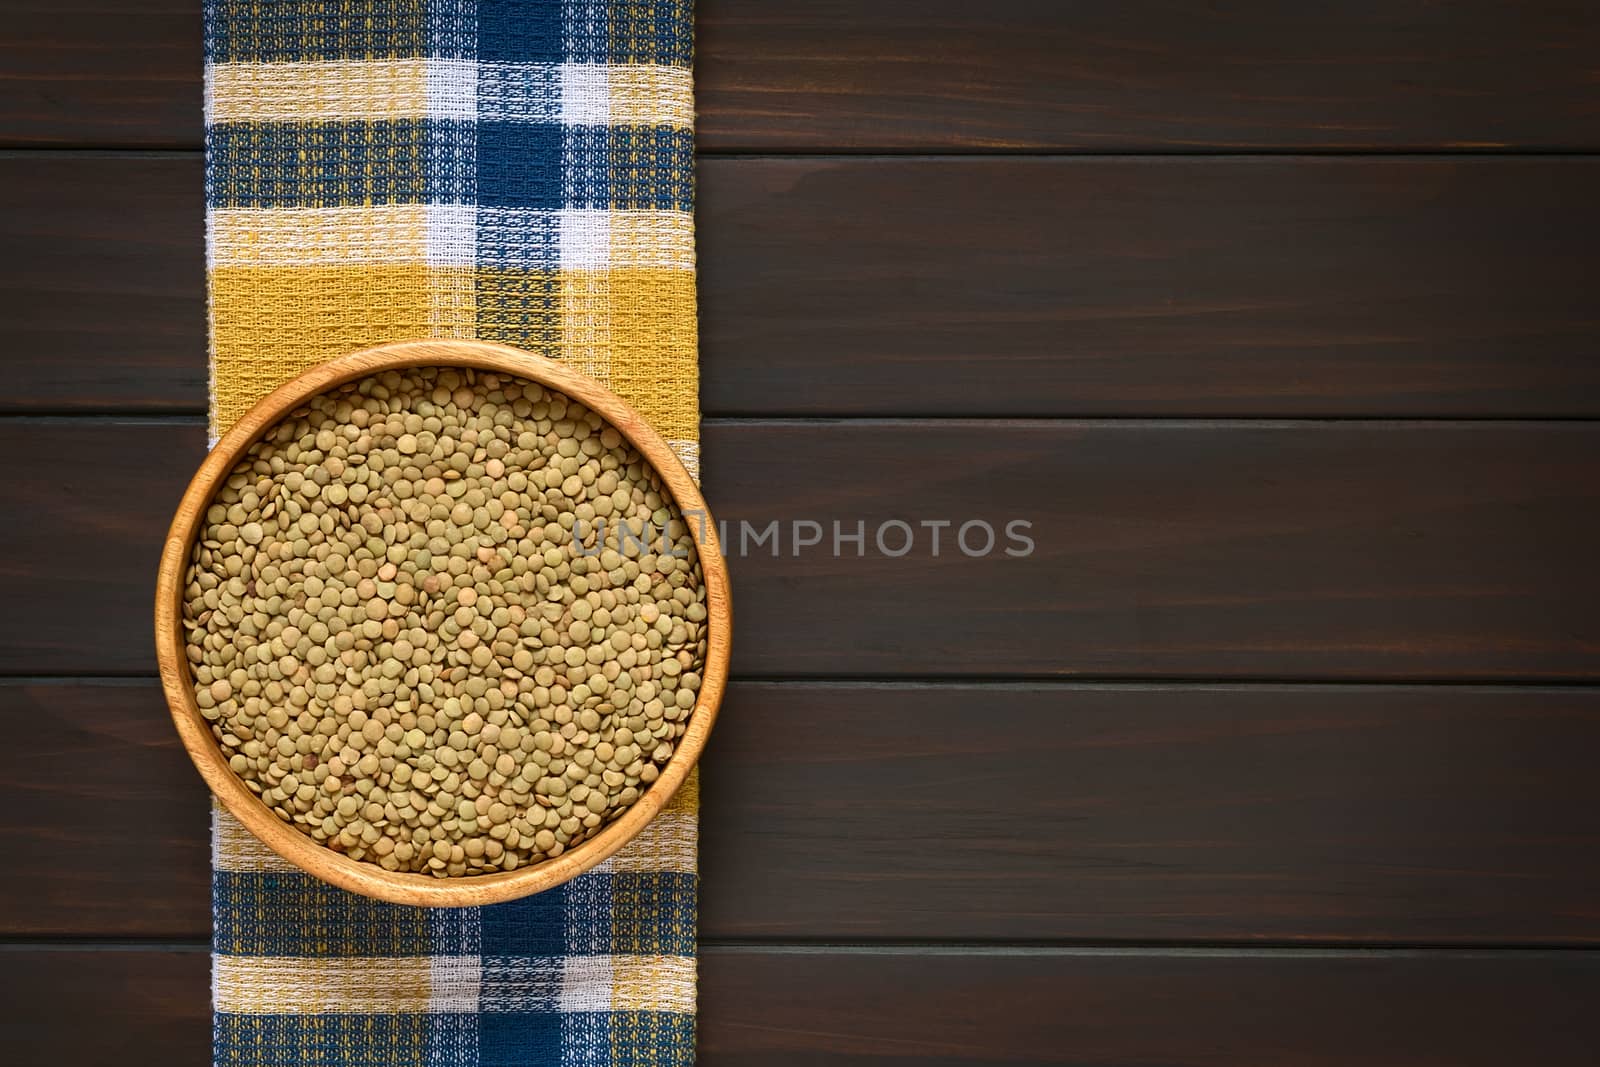 Overhead shot of raw lentils (lat. Lens culinaris) in wooden bowl, photographed on kitchen towel on dark wood with natural light